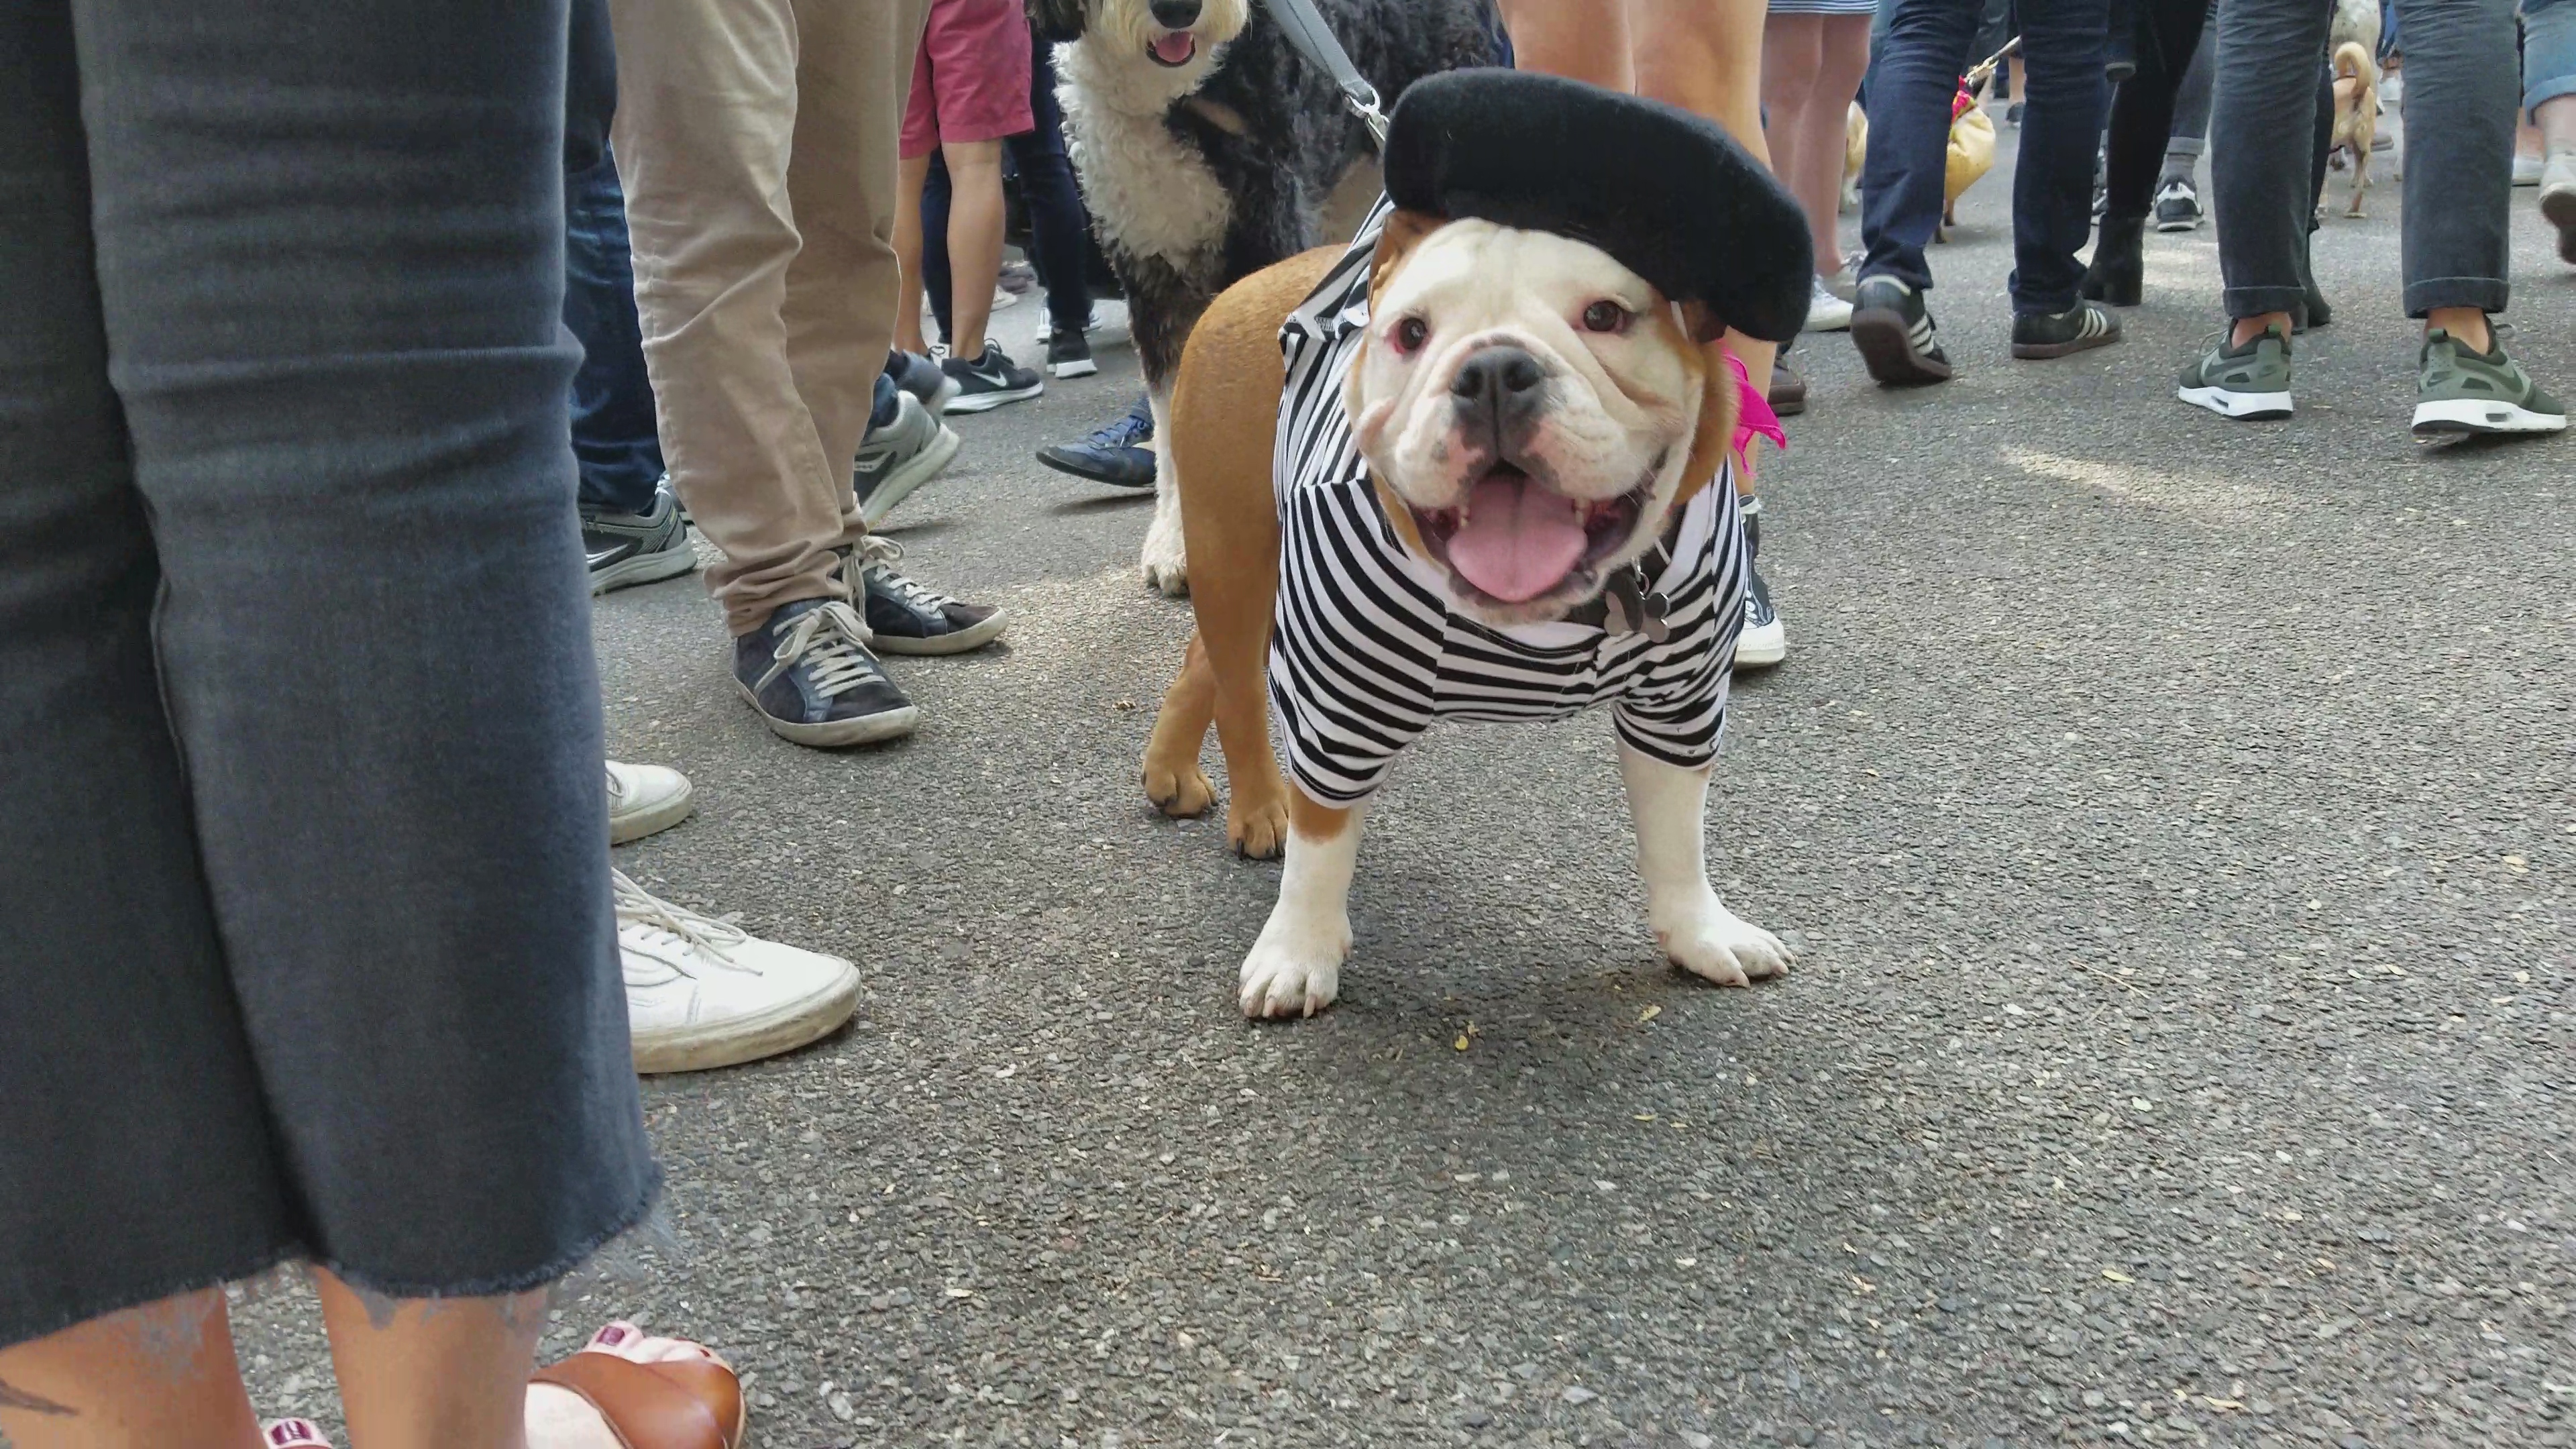 Dog Halloween Outfits: Here are 16 fun costume ideas for your